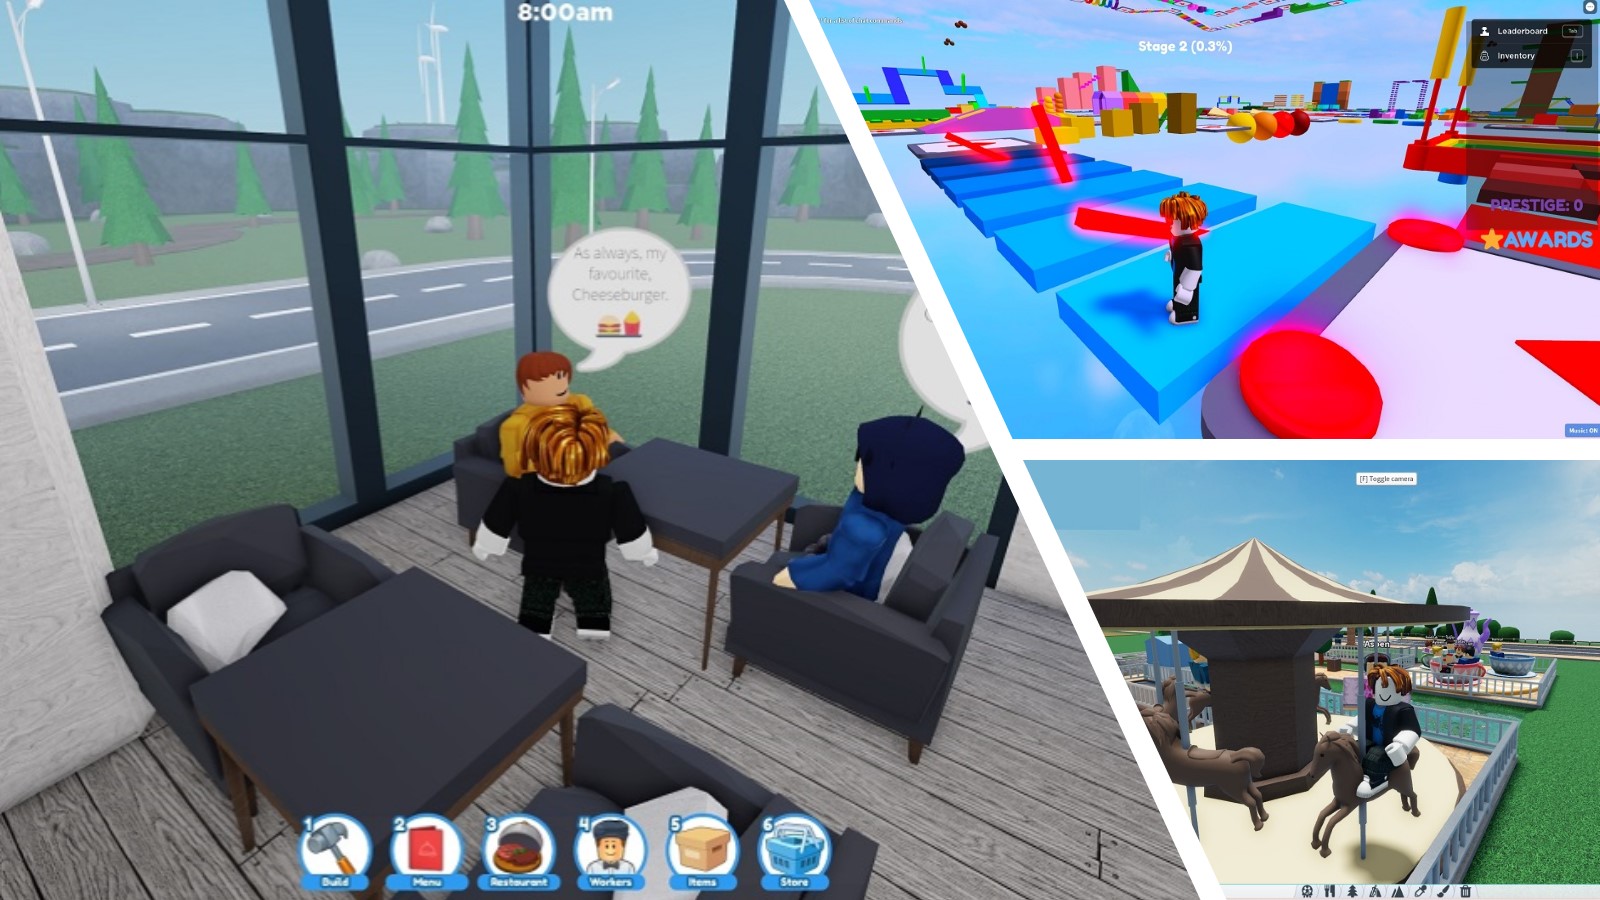 Roblox - Super Check Point is one of our favorite ROBLOX games of